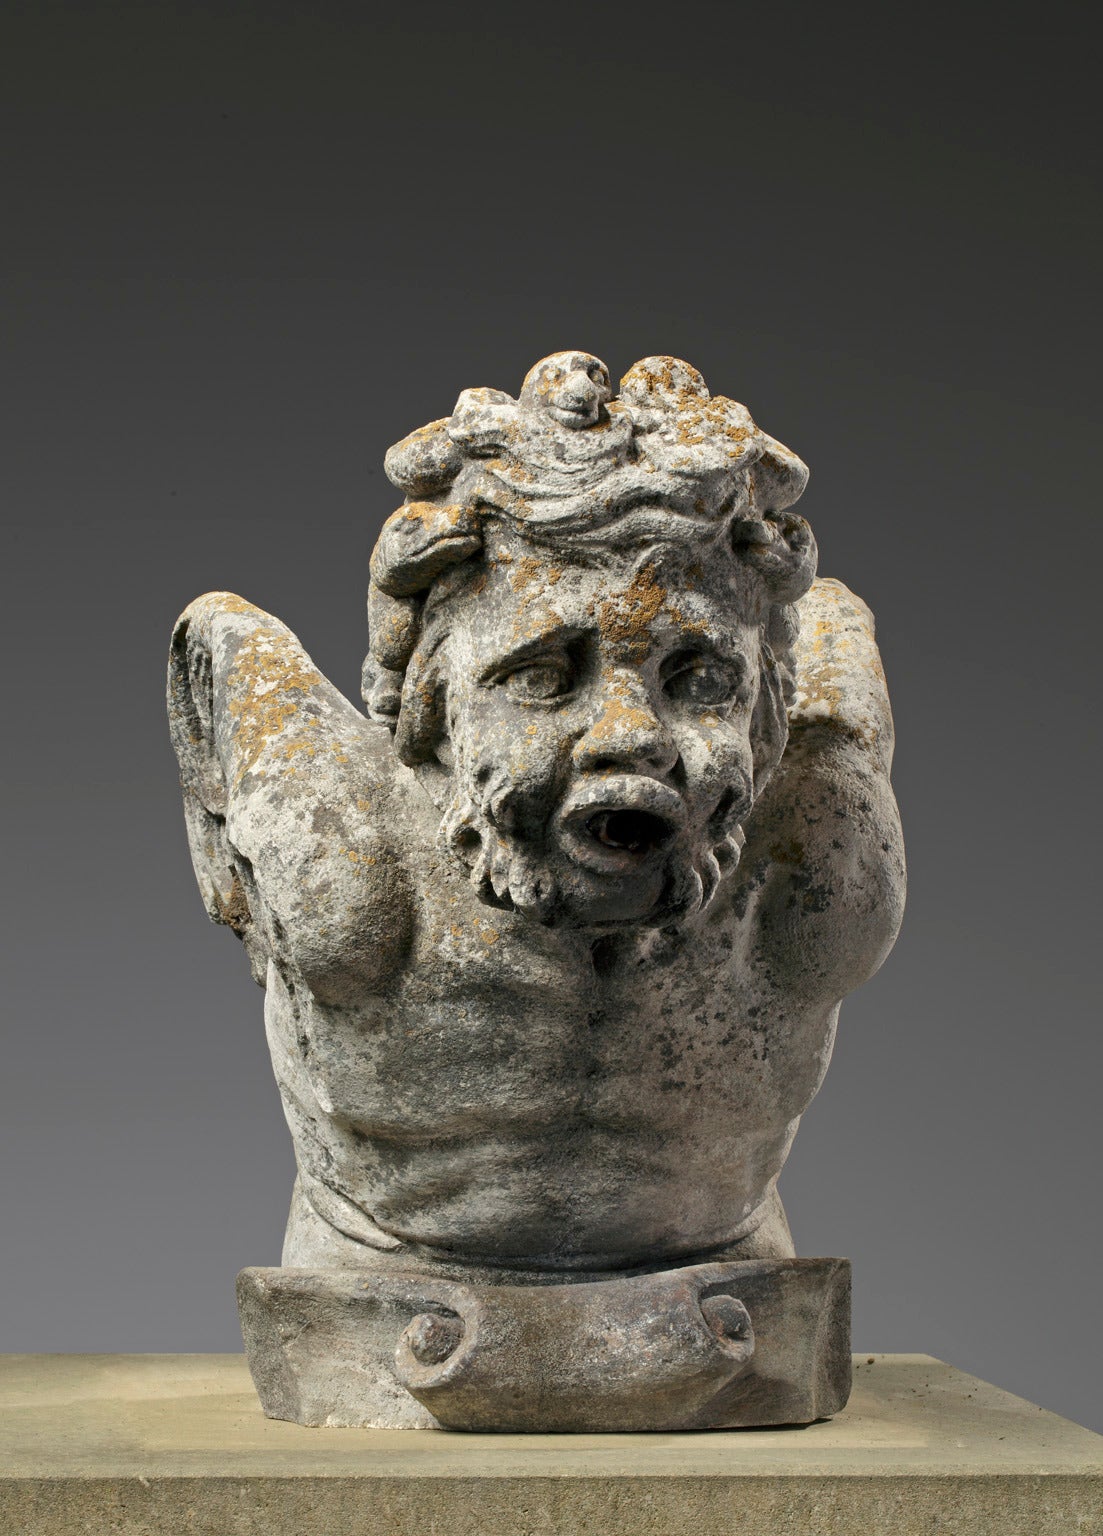 This gargoyle/fountainhead was made in France in the 19th century. It is sculpted in the shape of a bearded man. His facial features remind of Bacchus, the Roman god of wine. His mouth is opened wide, so water can flow from his mouth.

His arms